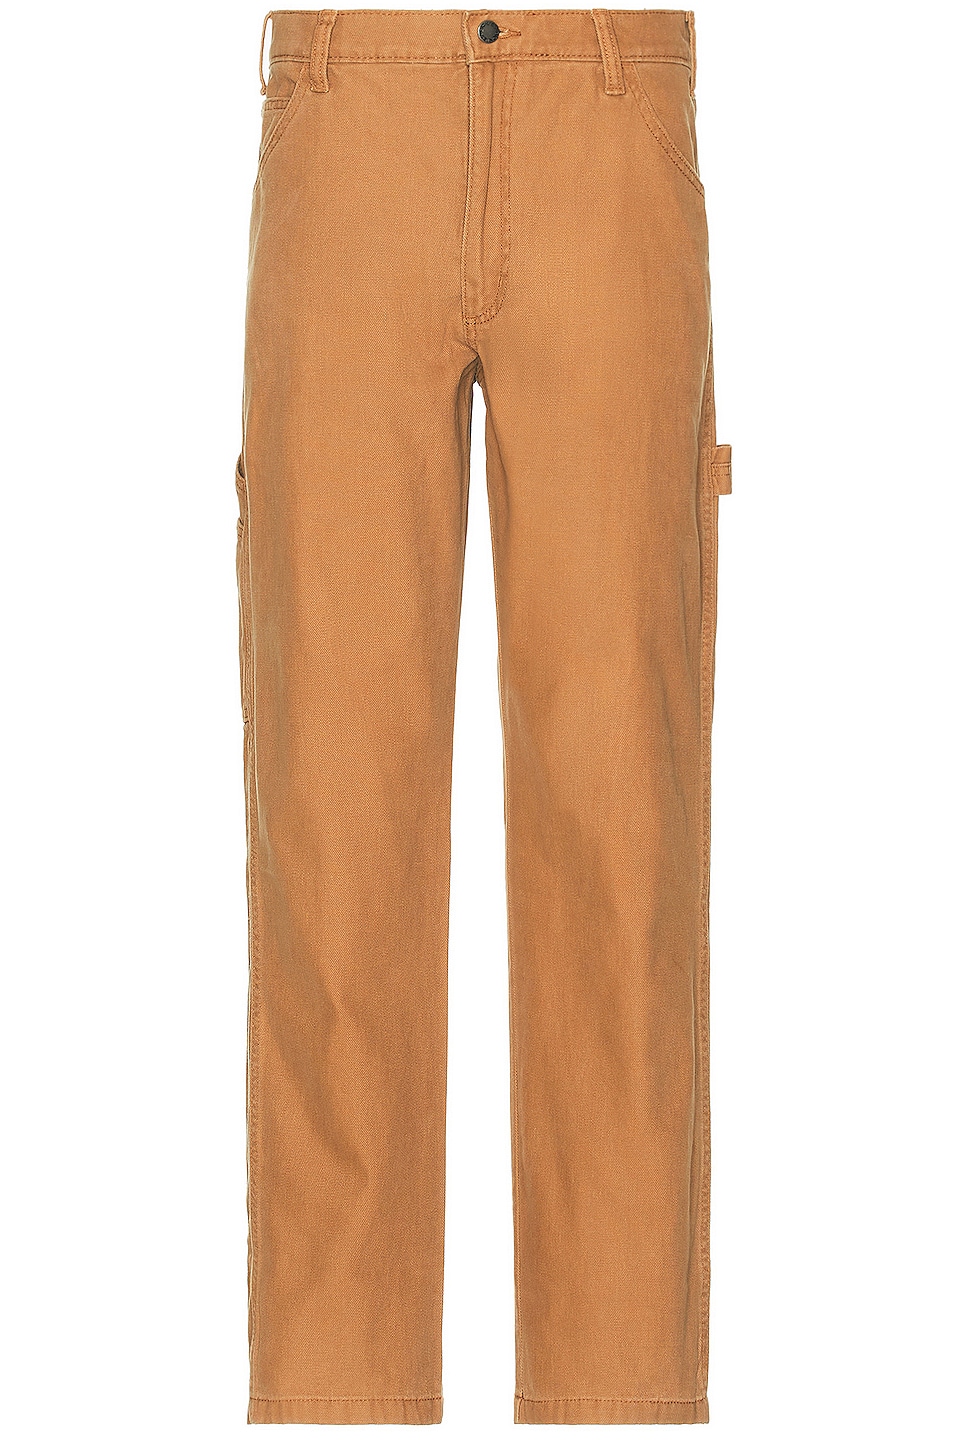 Image 1 of Dickies Duck Carpenter Pants in Stonewashed Brown Duck